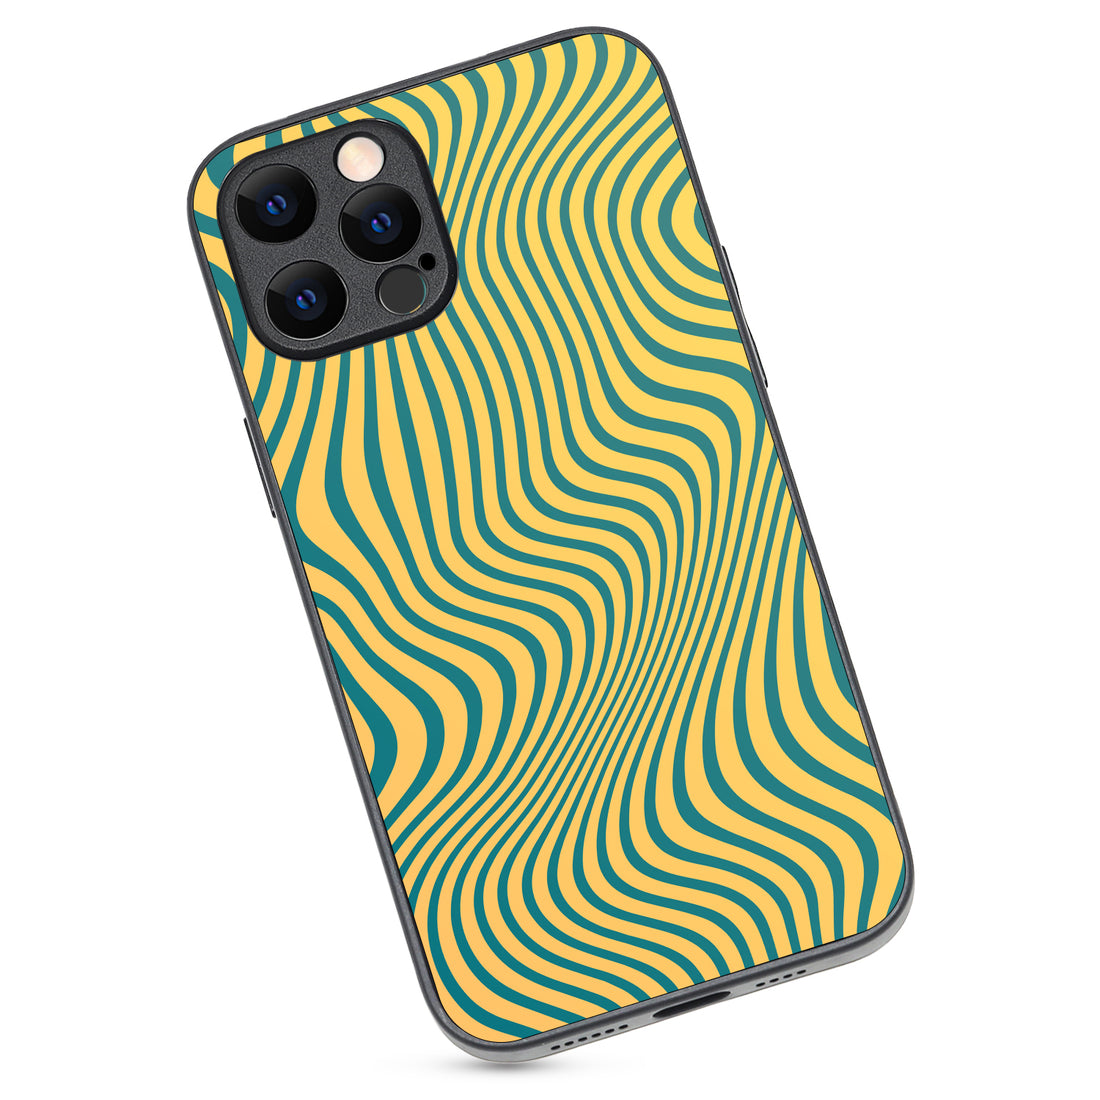 Green Strips Optical Illusion iPhone 12 Pro Max Case